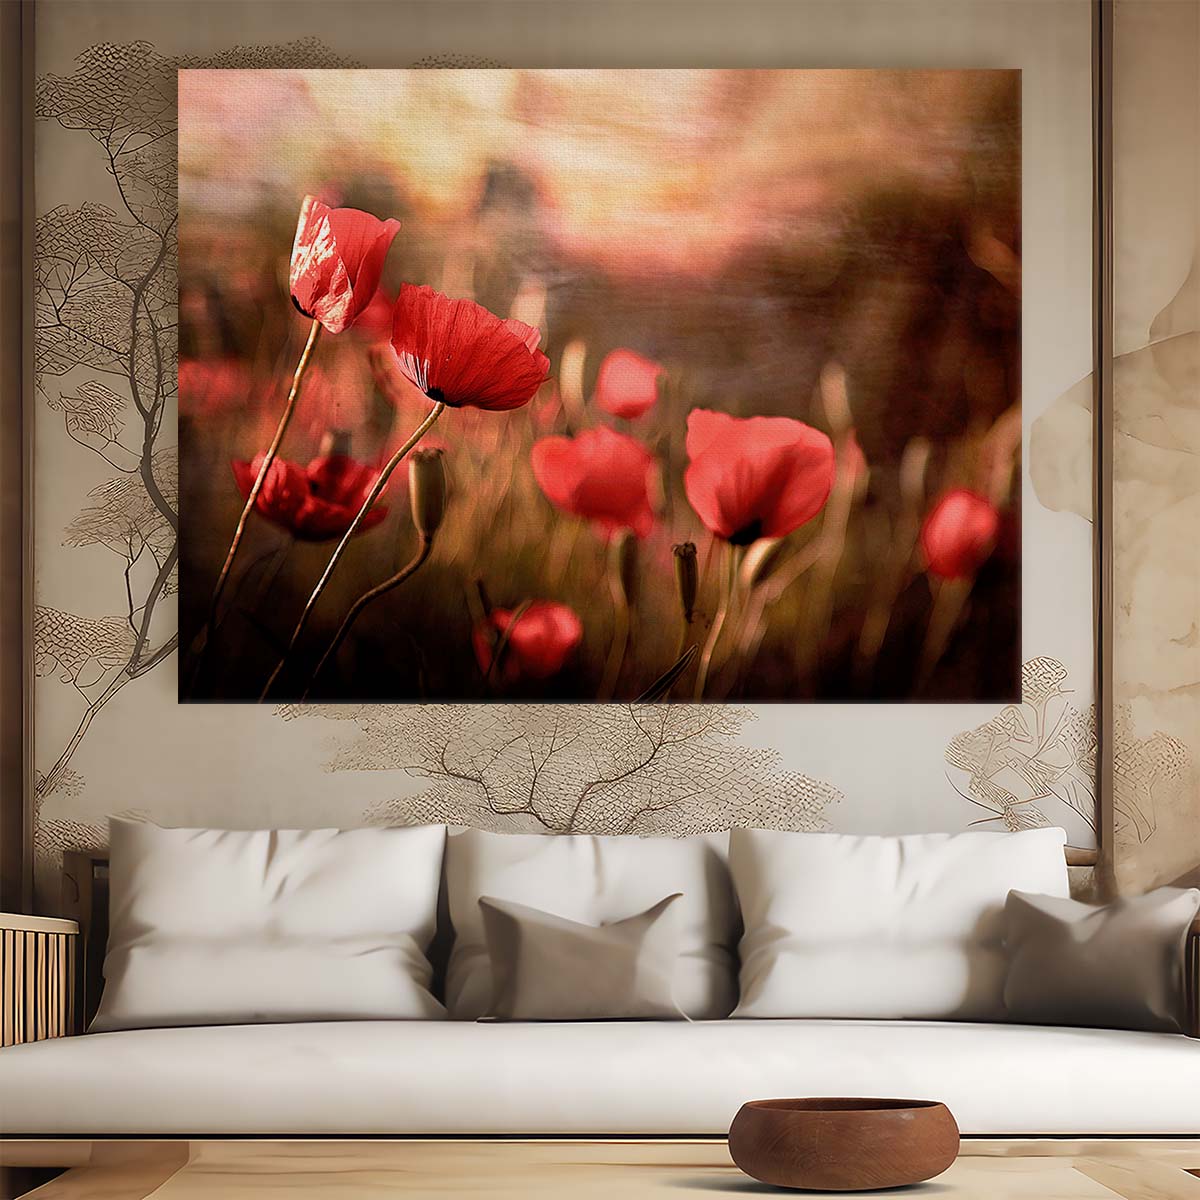 Romantic Red Poppy Sunrise Meadow Wall Art by Luxuriance Designs. Made in USA.